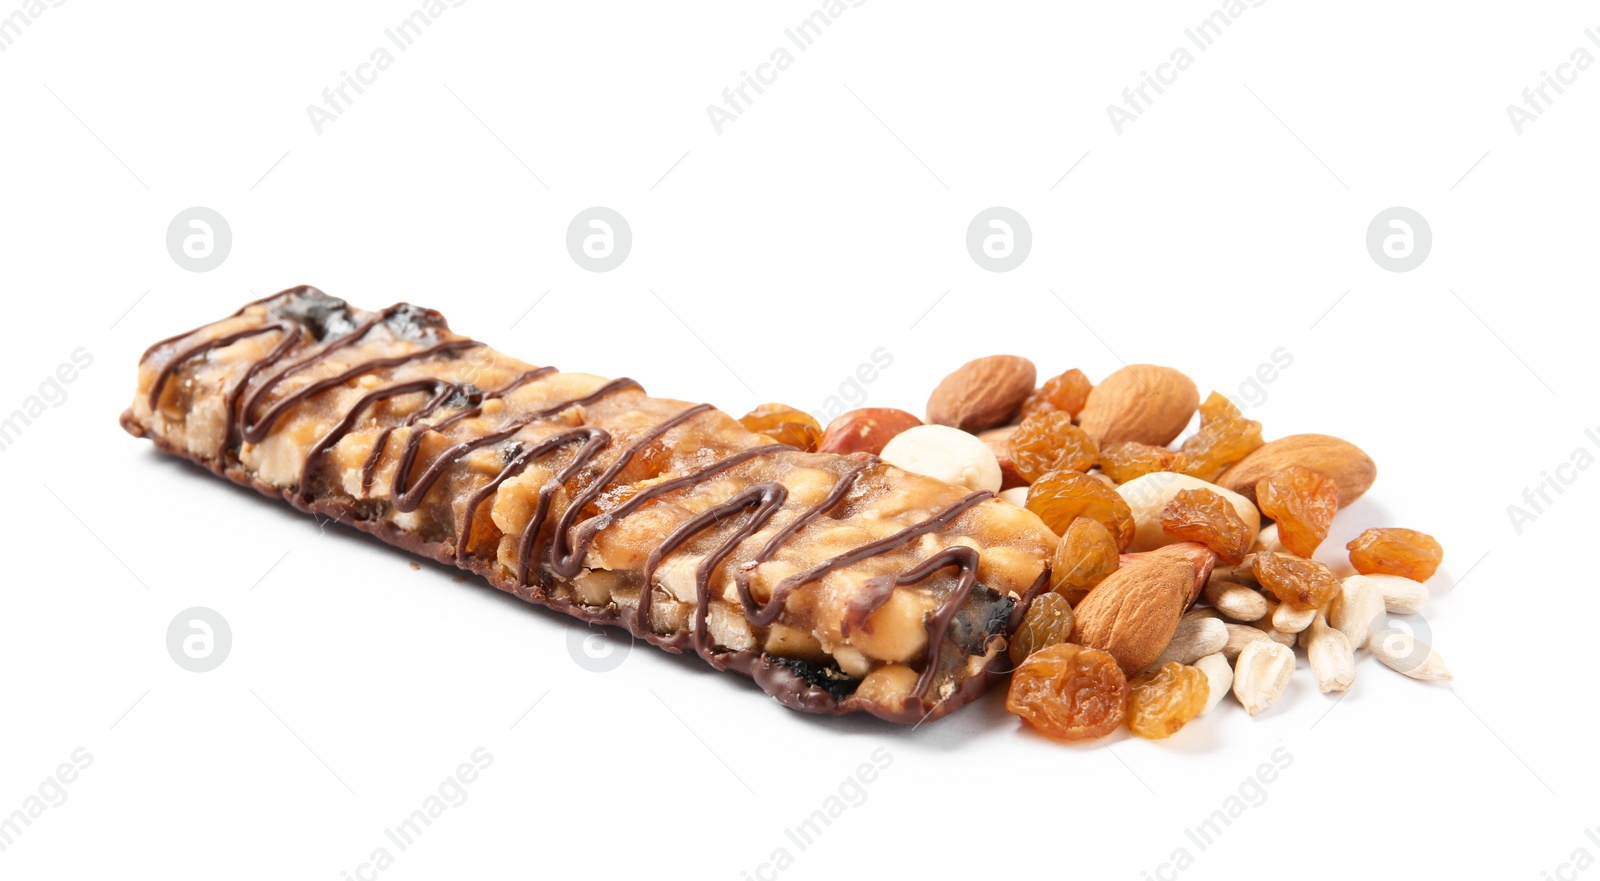 Photo of Grain cereal bar with chocolate, nuts and raisins on white background